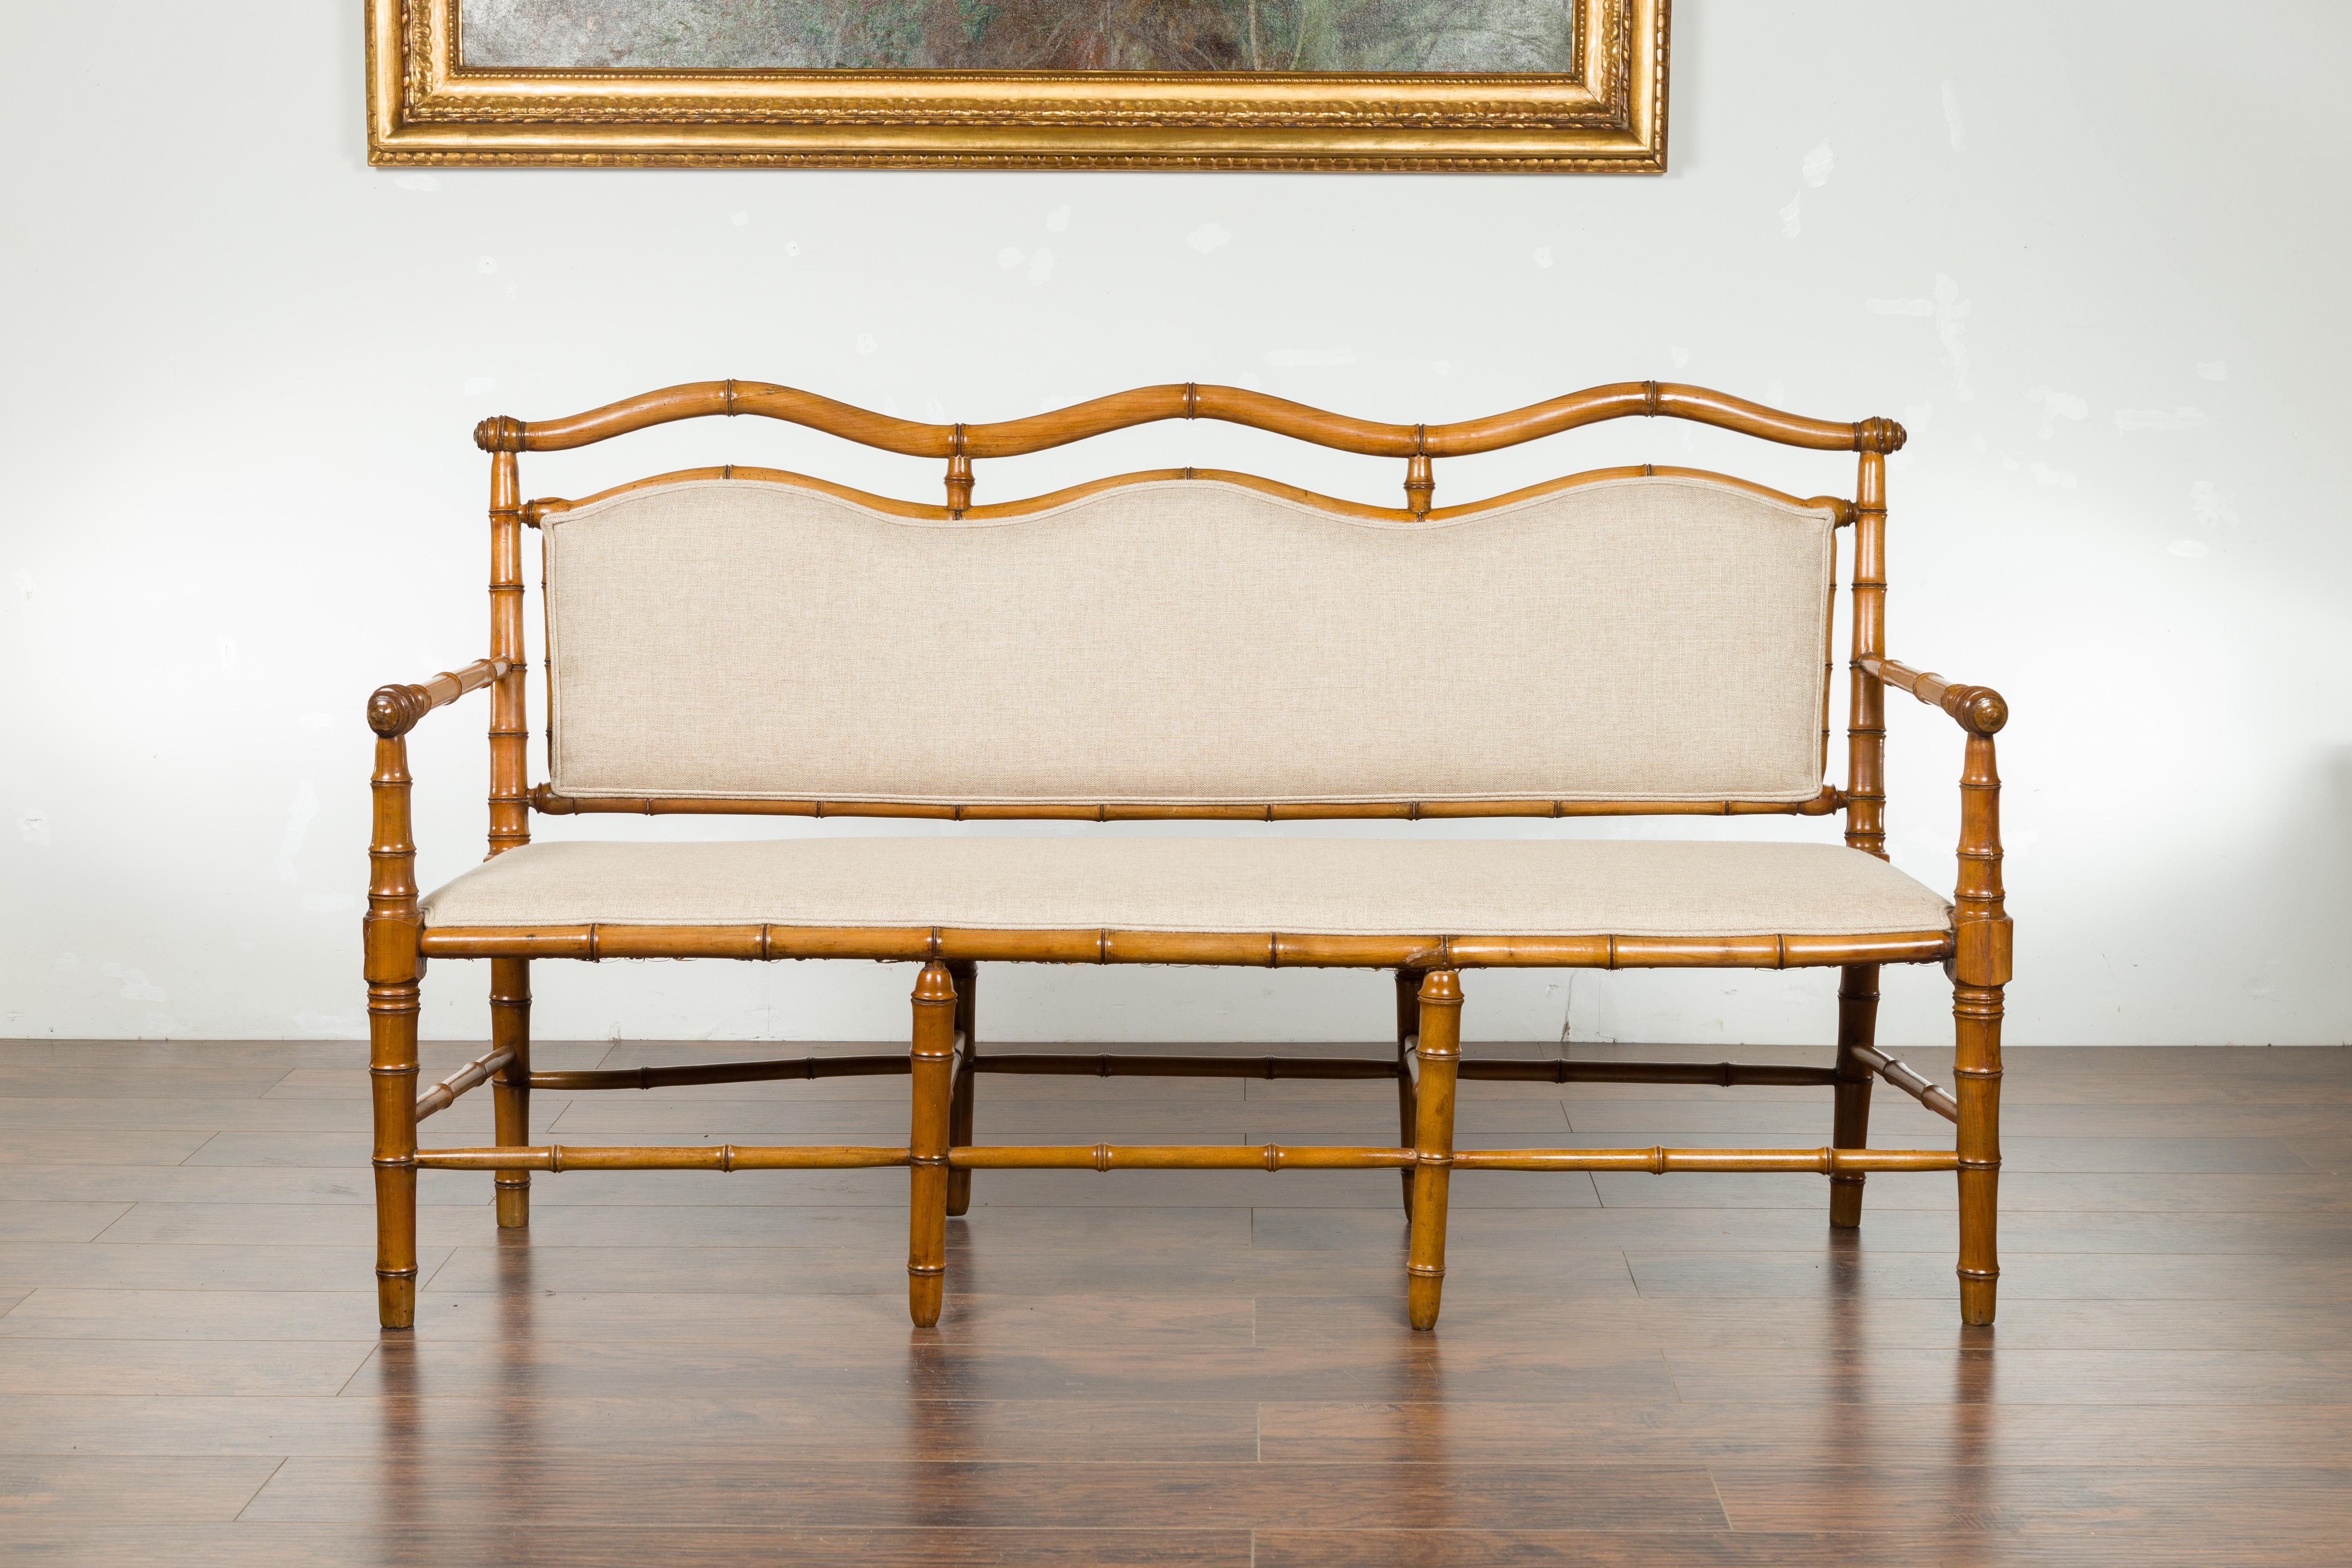 An English walnut faux-bamboo three-seat bench from the late 19th century, with new linen upholstery. Created in England during the last quarter of the 19th century, this walnut bench features a faux bamboo structure perfectly complimented by a new